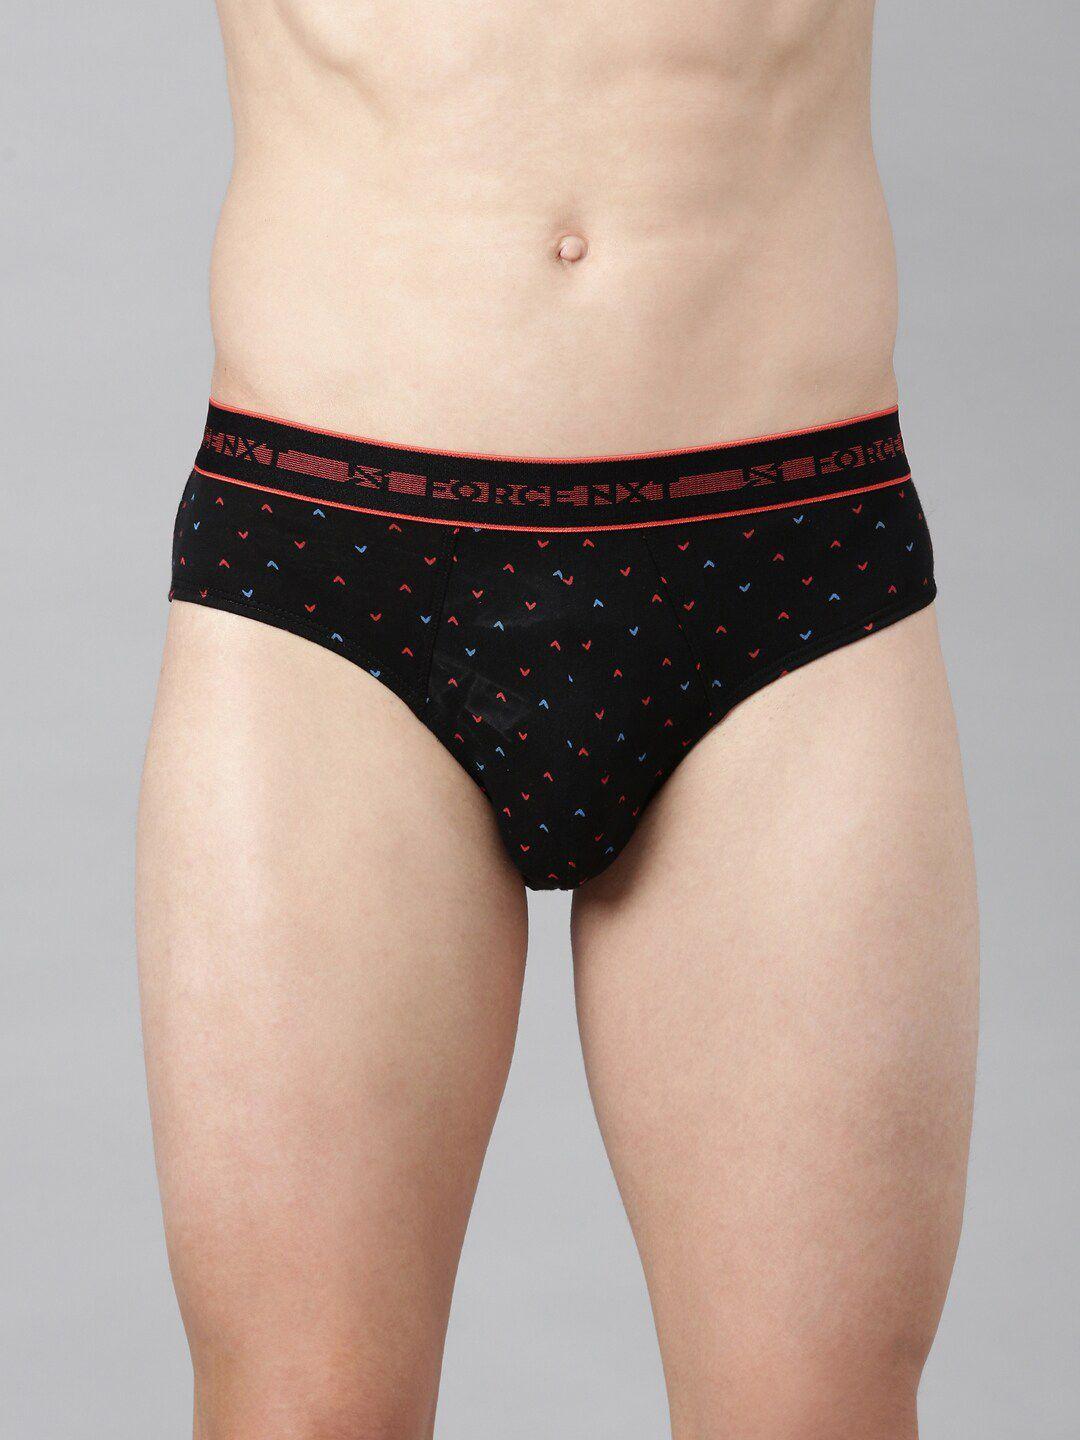 force nxt men assorted printed super combed cotton basic briefs